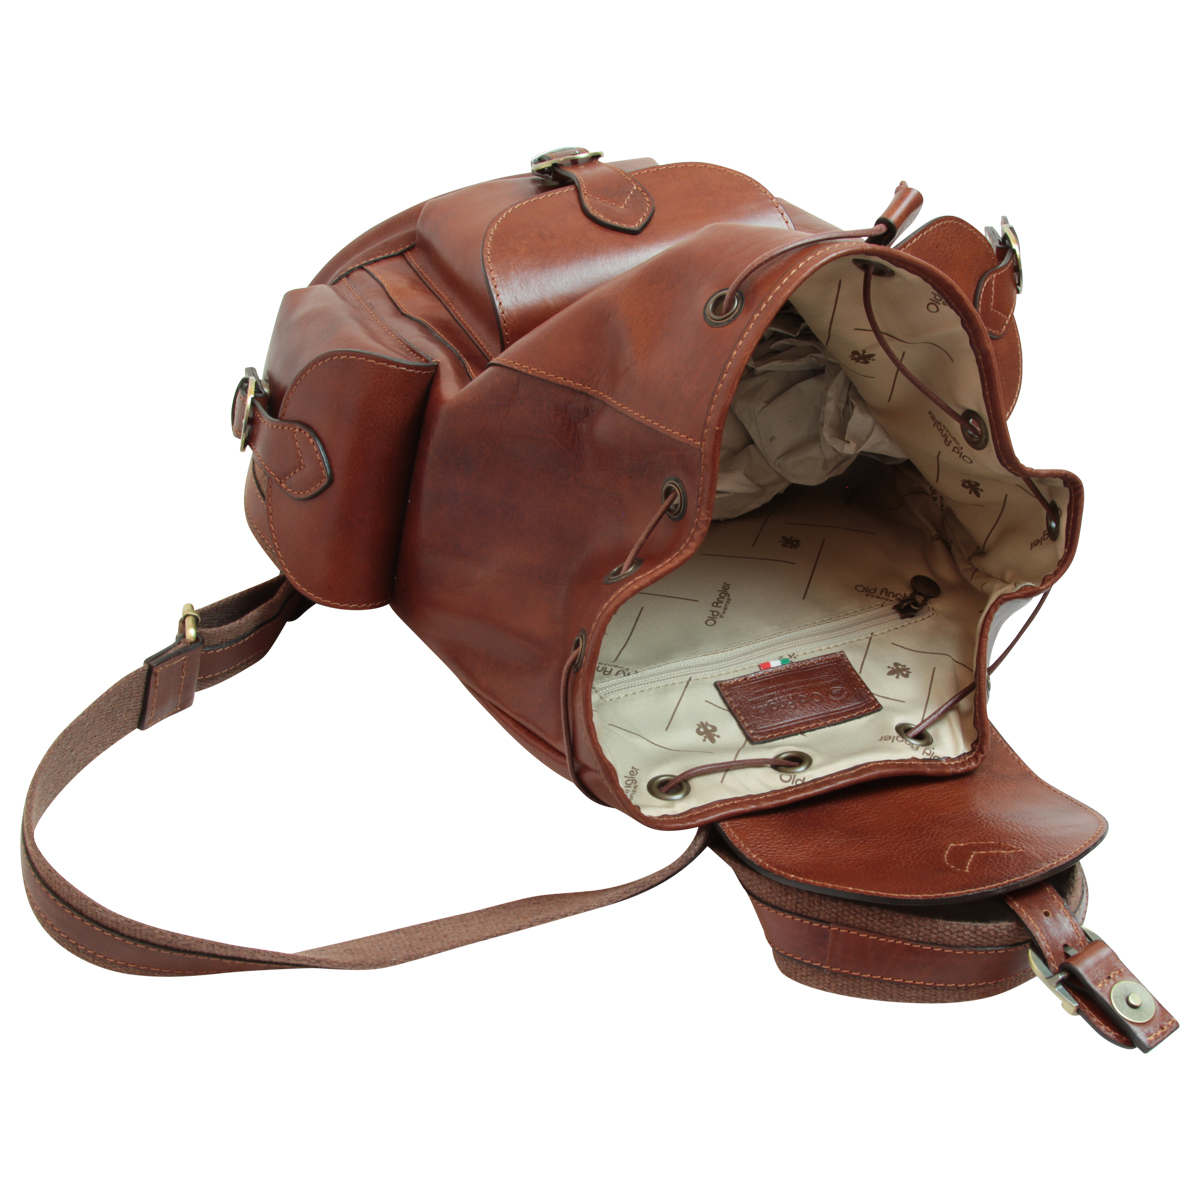 Leather backpack with 3 exterior pockets - Brown | 109105MA US | Old Angler Firenze